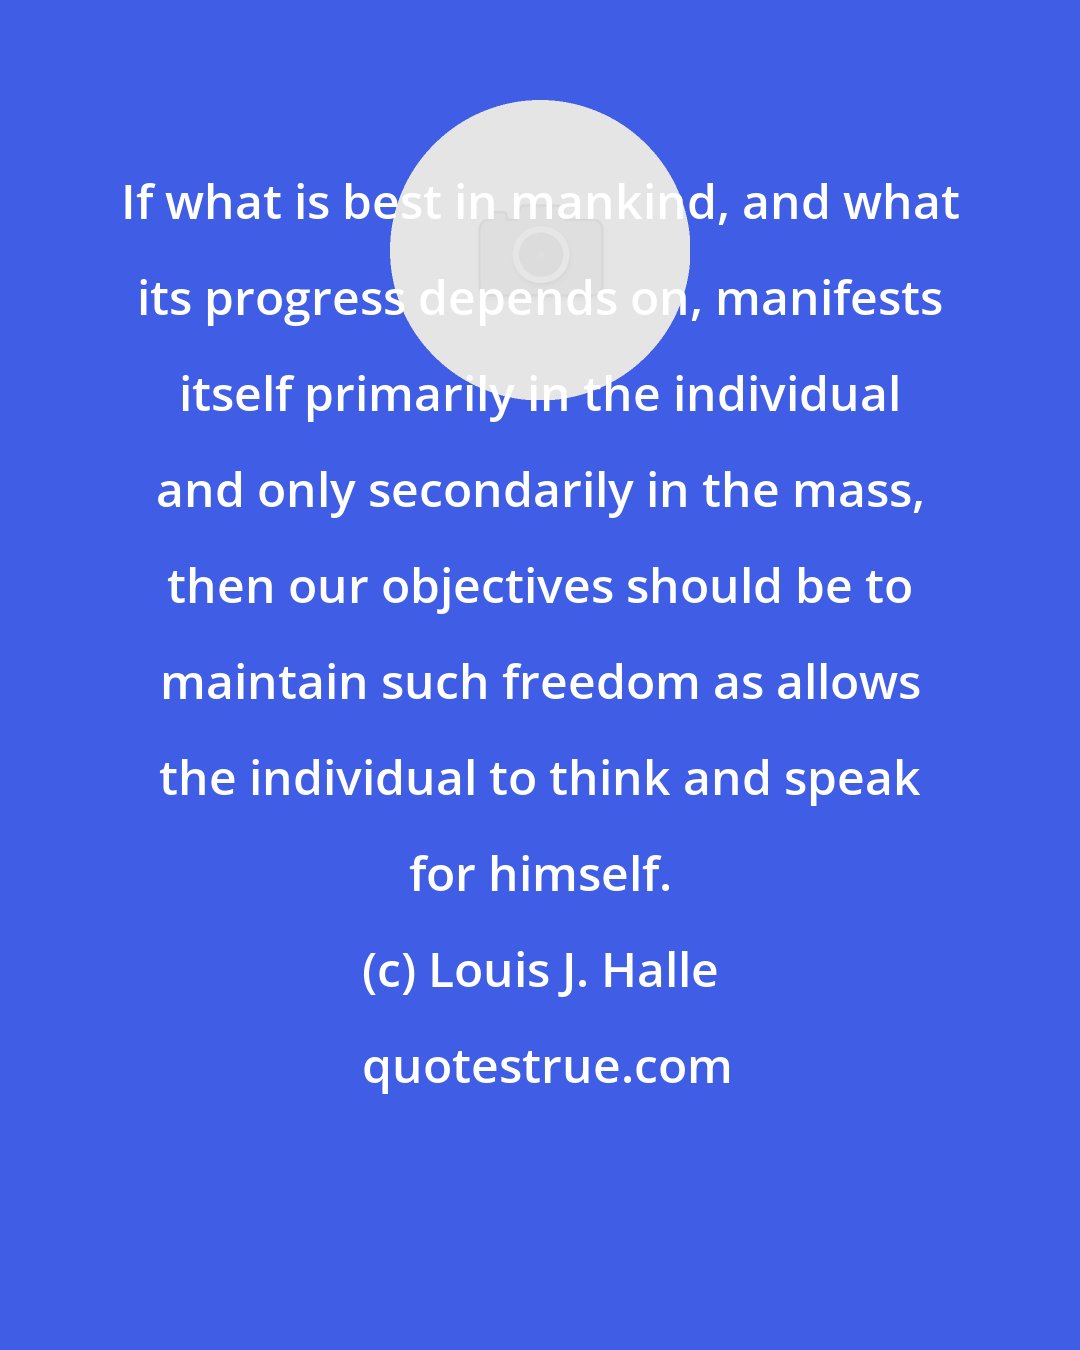 Louis J. Halle: If what is best in mankind, and what its progress depends on, manifests itself primarily in the individual and only secondarily in the mass, then our objectives should be to maintain such freedom as allows the individual to think and speak for himself.